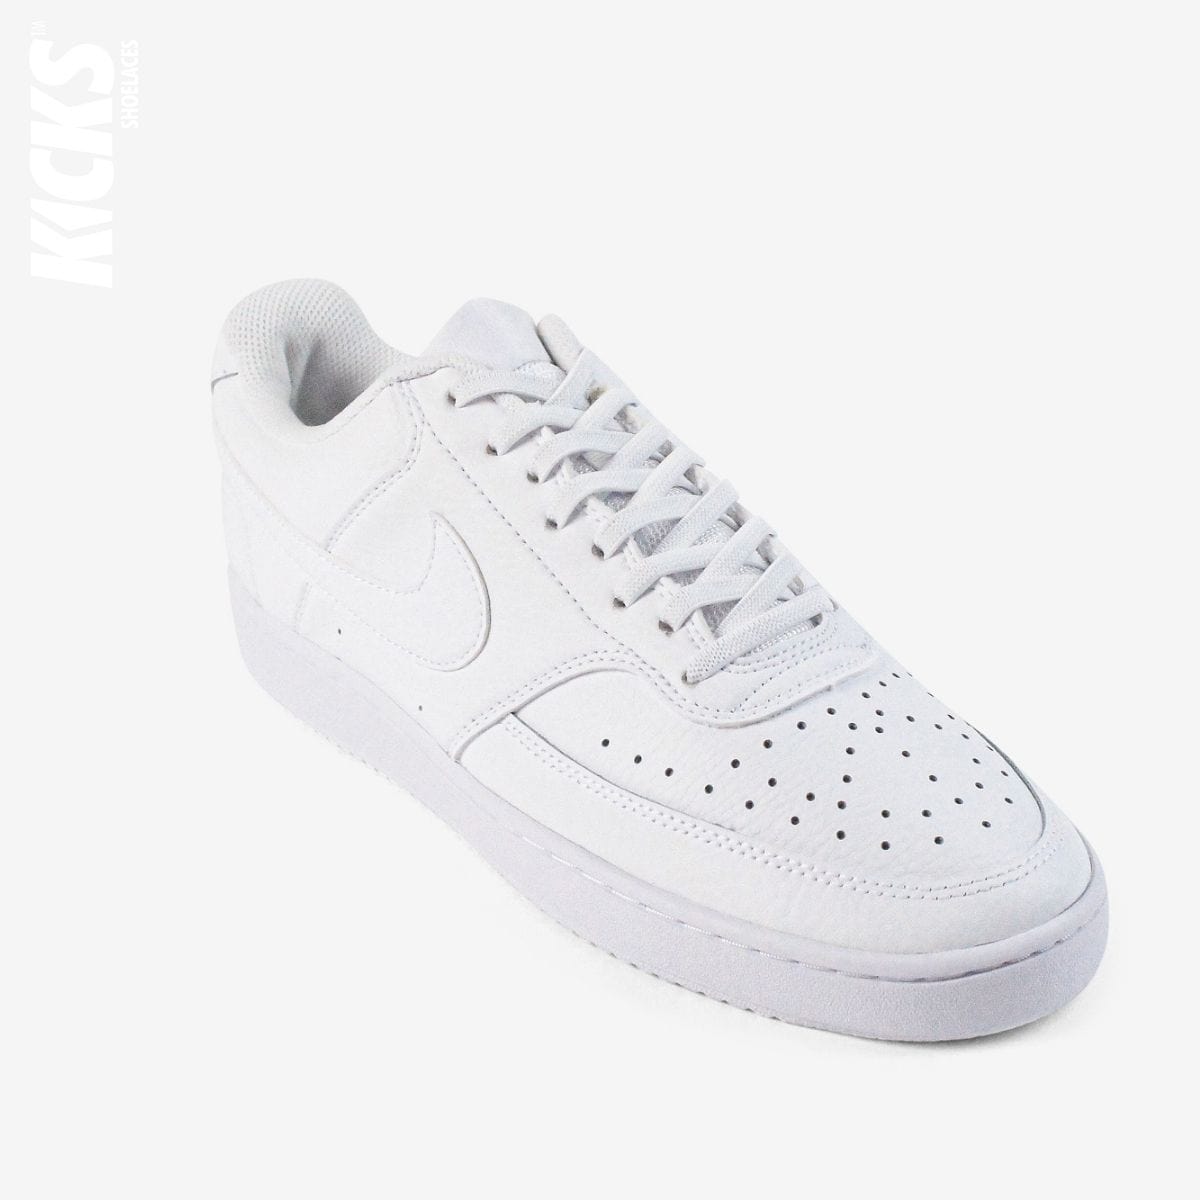 no-tie-shoelaces-with-white-laces-on-nike-white-sneakers-by-kicks-shoelaces